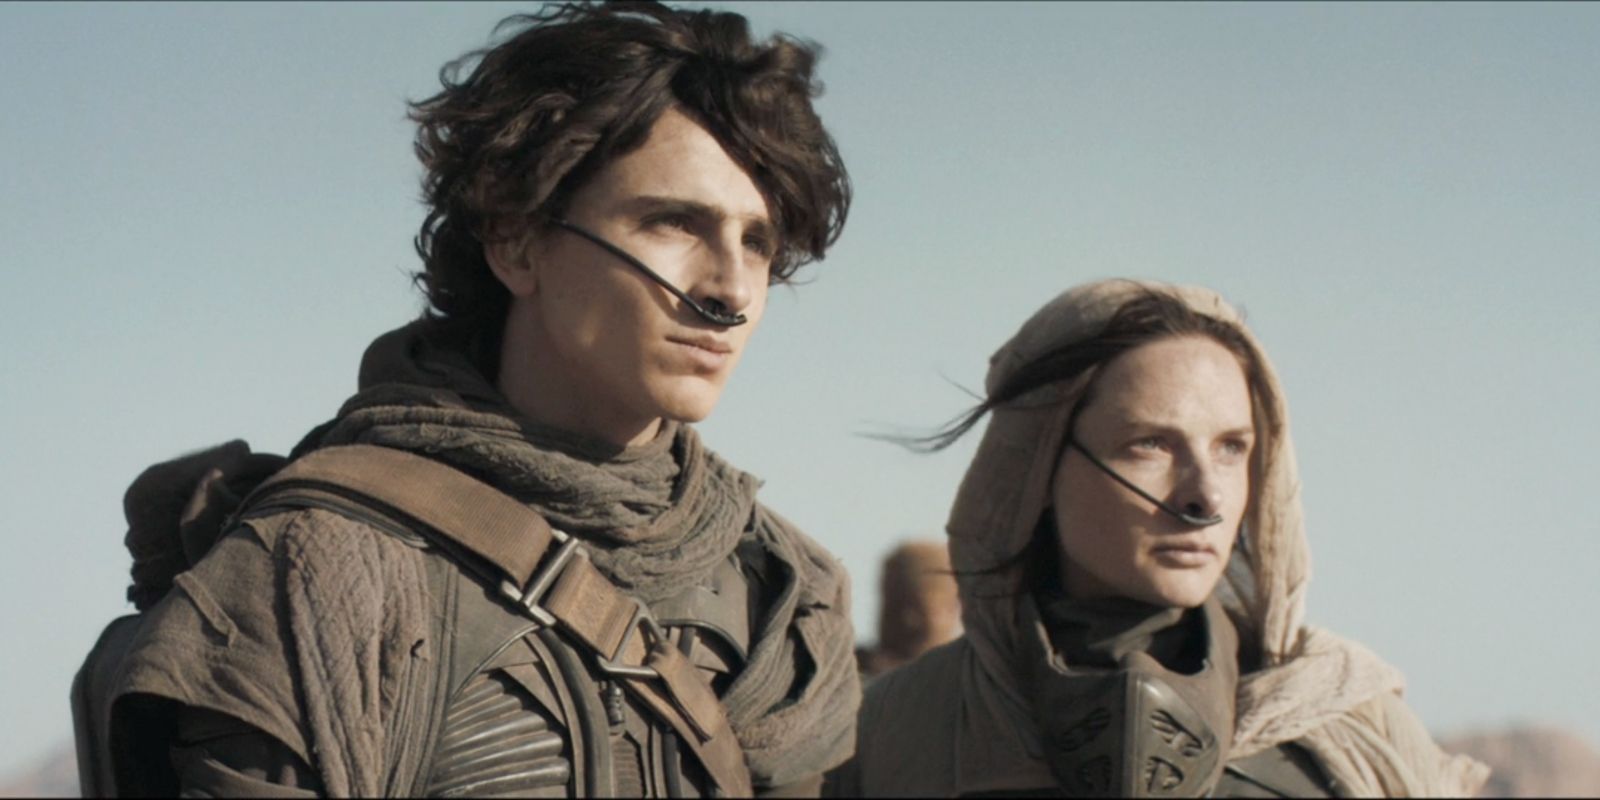 Paul and Jessica in Dune Part 1 on Arrakis